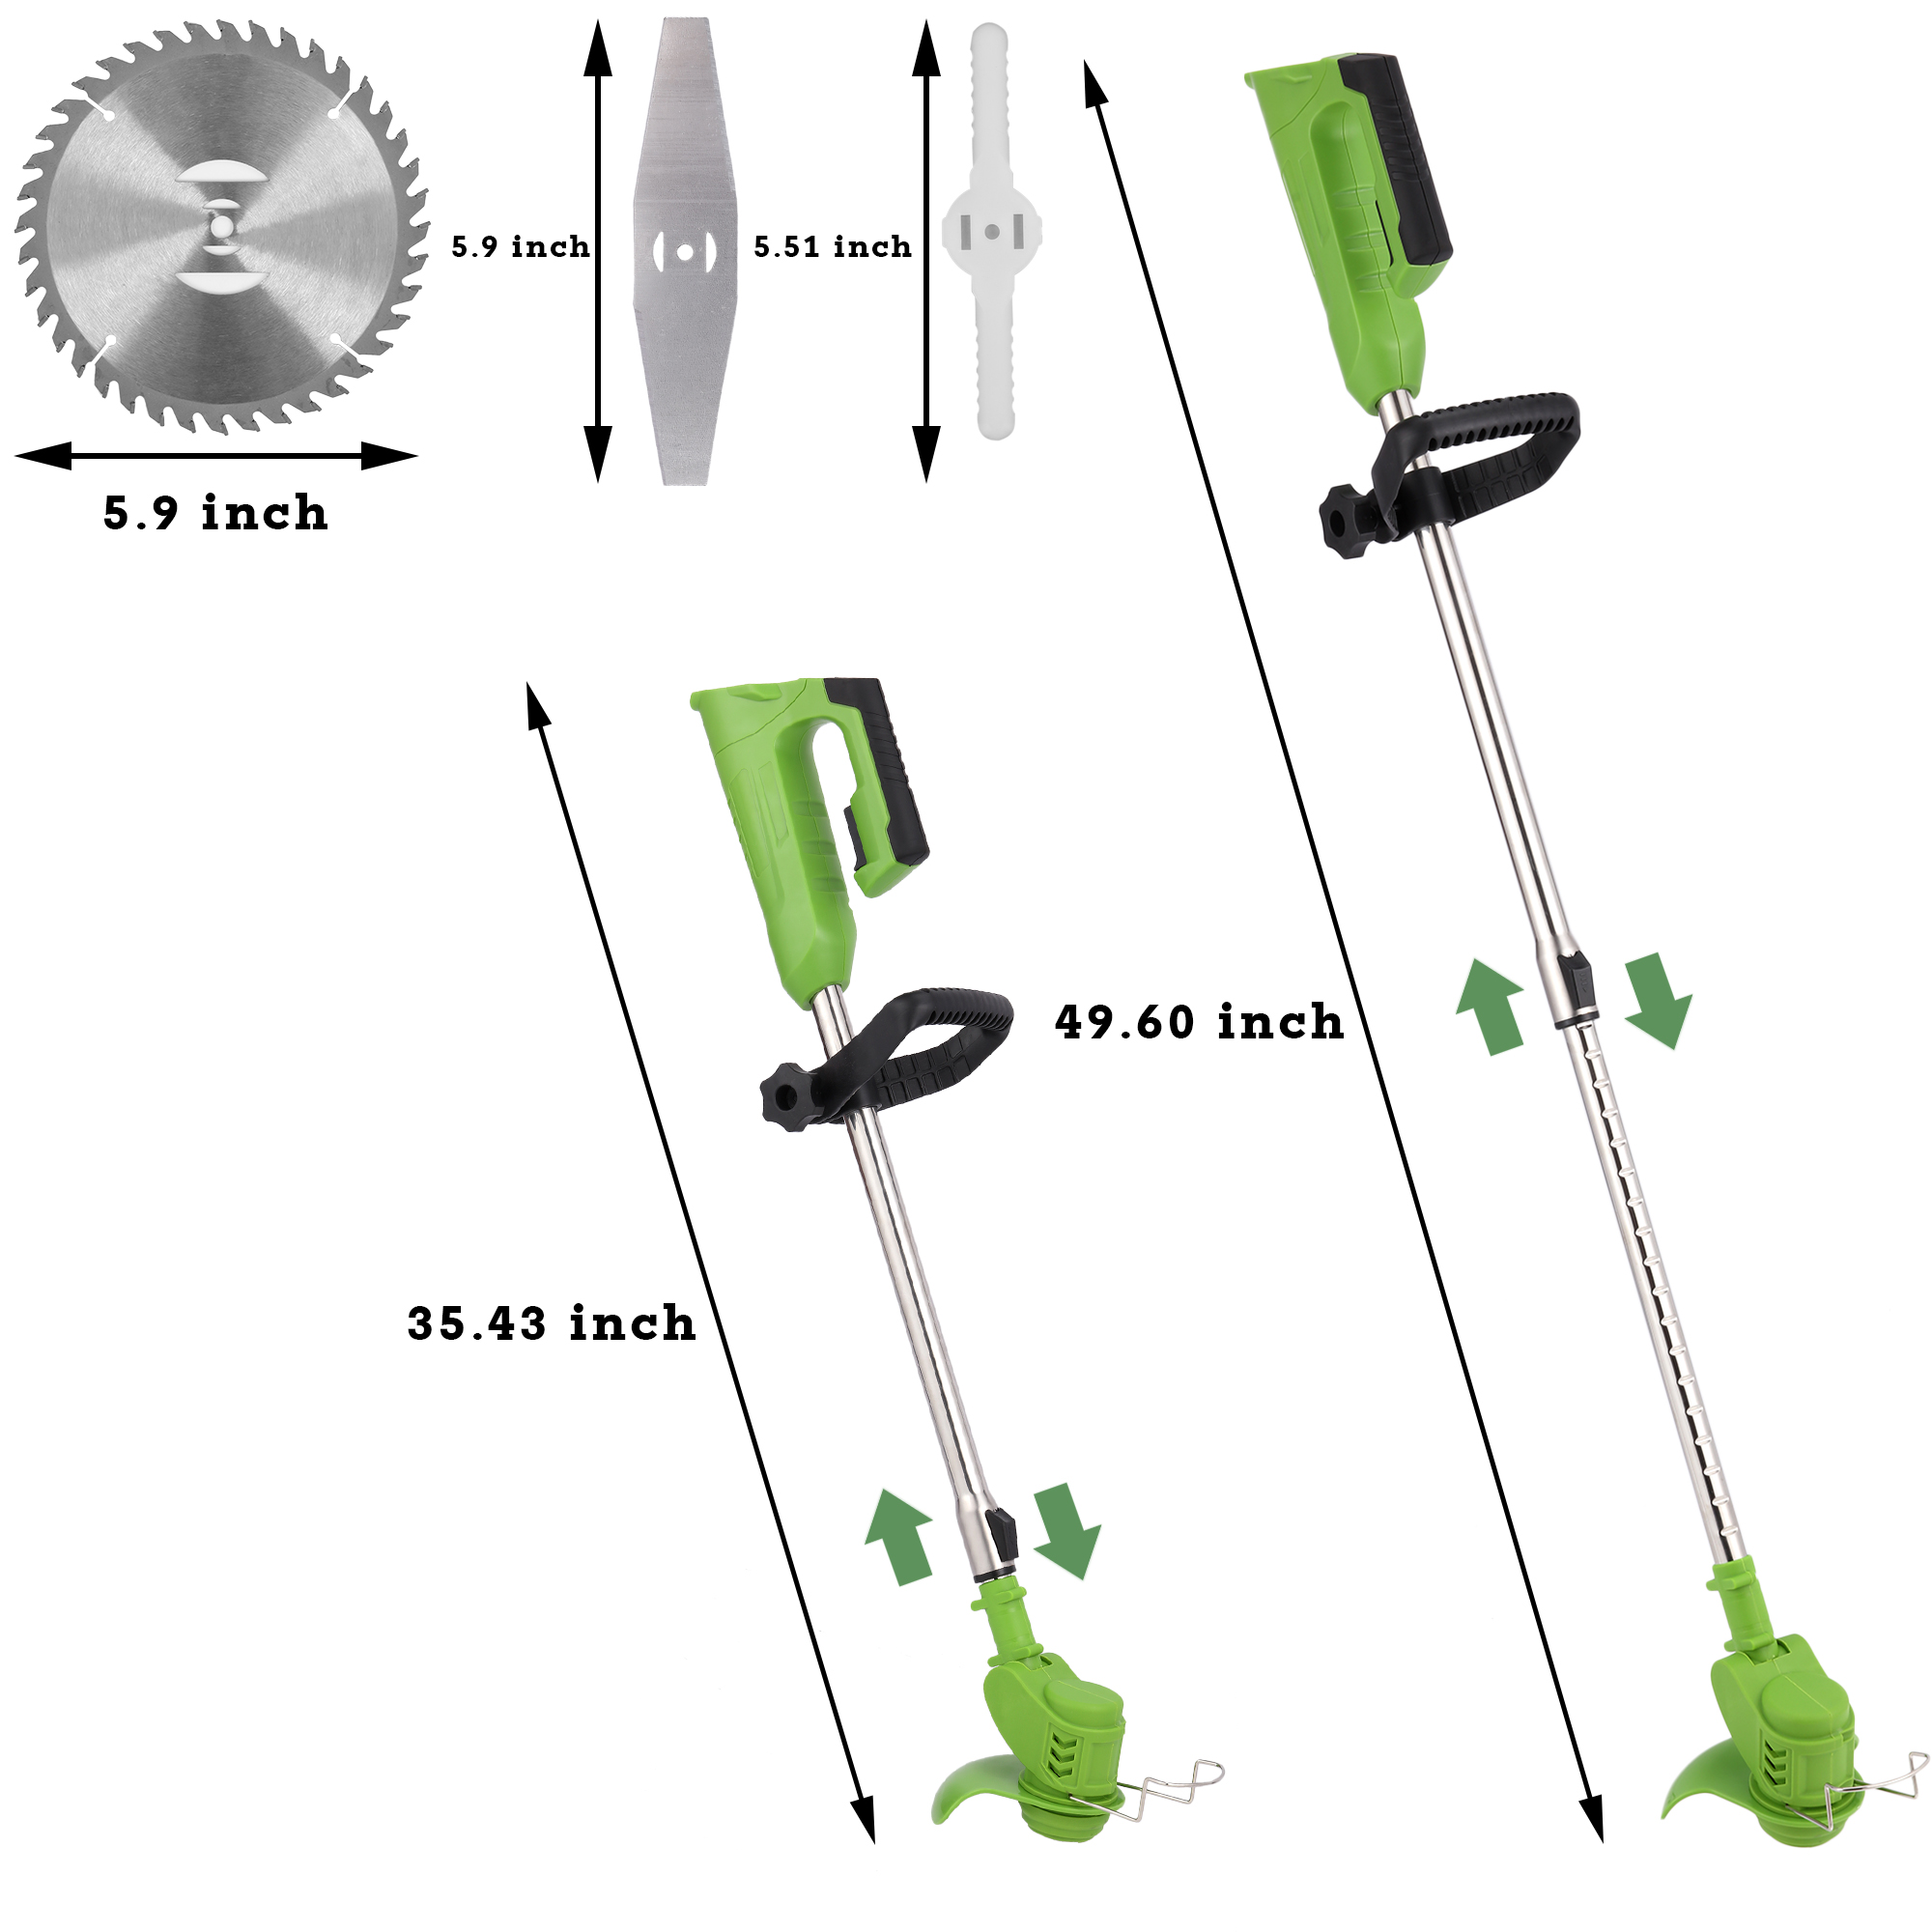 LELINTA 24V Cordless String Trimmer/Edger, Battery Powered Weed Eater Cordless- Electric Weed Wacker Rechargeable Trimmer Edger Lawn Tool,Green 2 Battery & 1 Charger - image 4 of 8